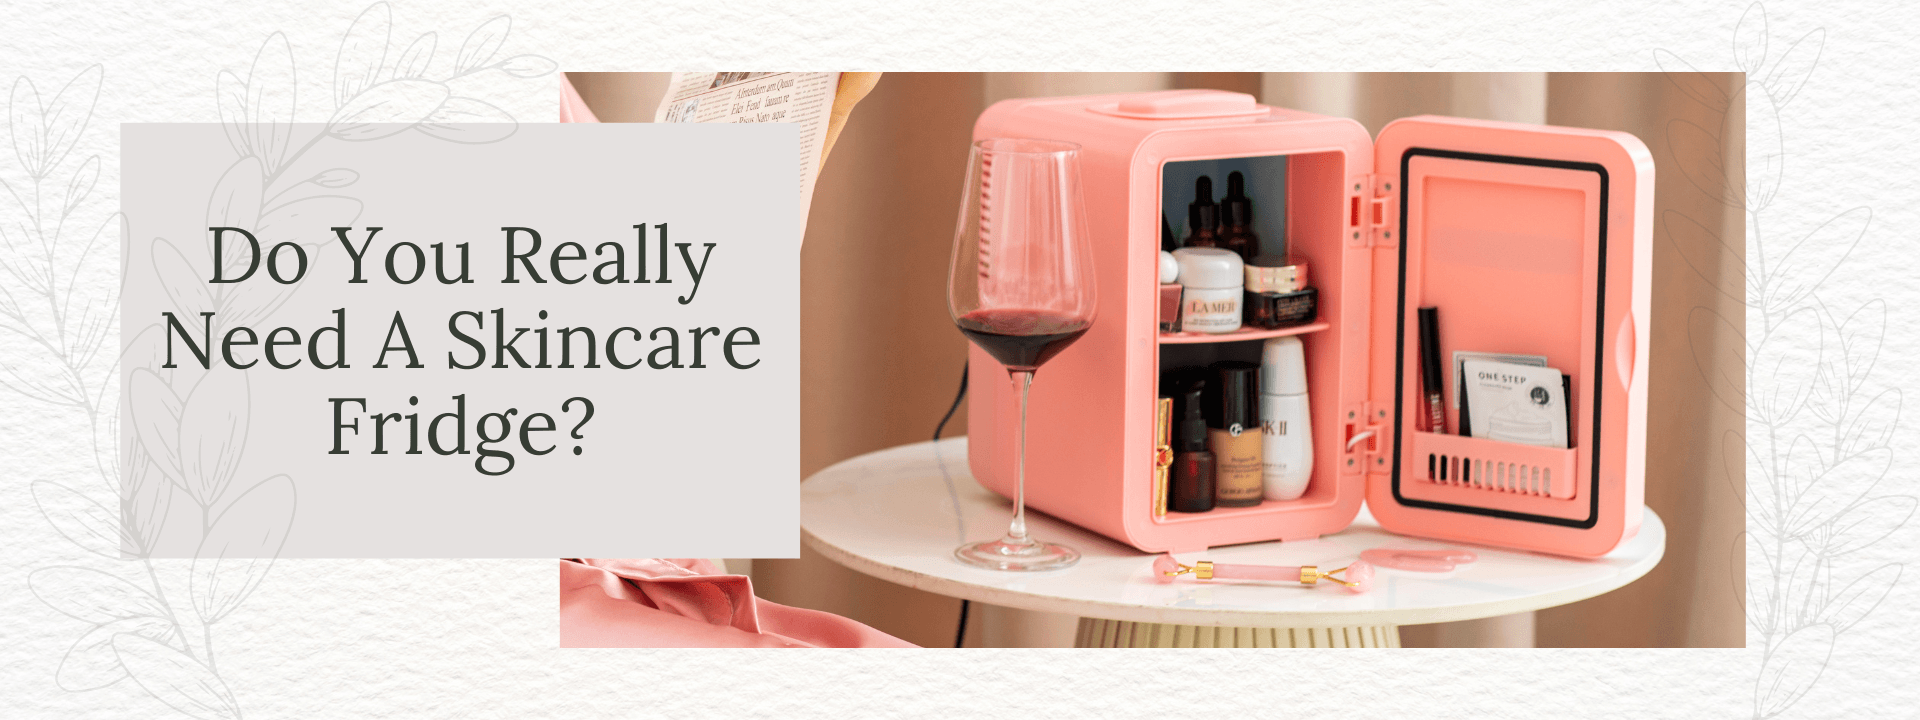 Do You Really Need A Skincare Fridge? -- What Is It? - 1st Mini Skincare Fridges With LED Mirror | COOSEON®